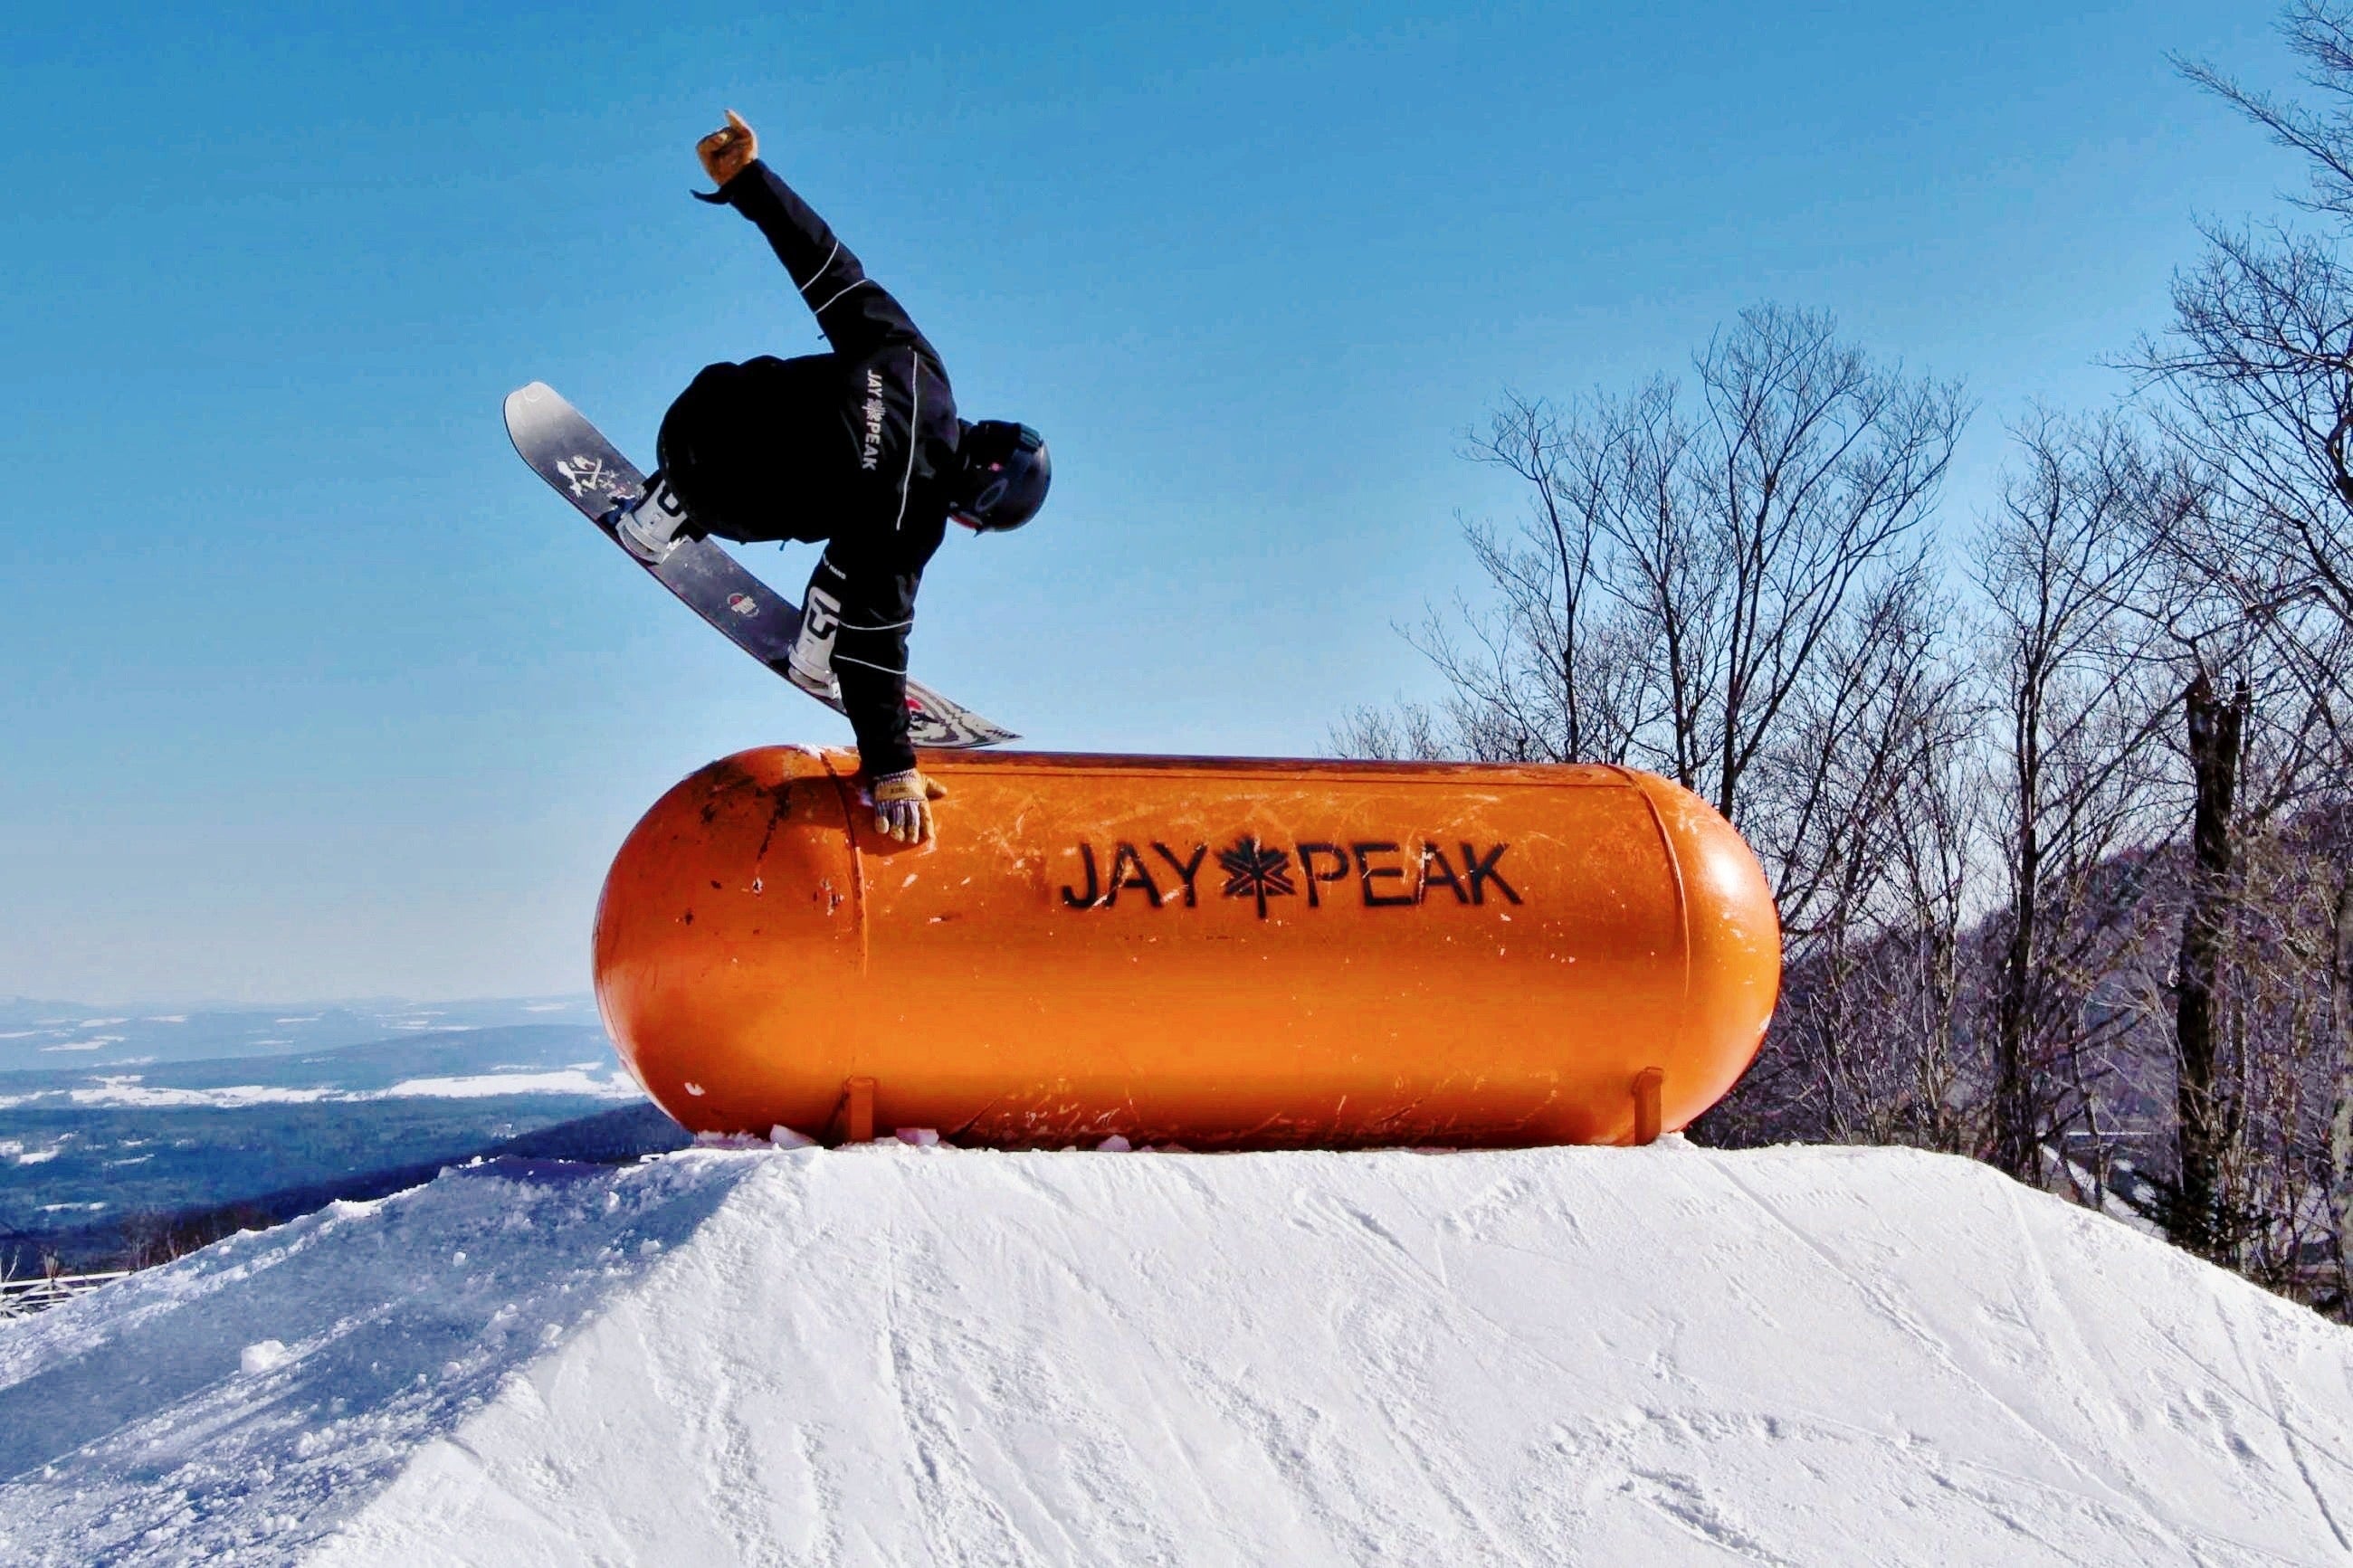 snowboarder doing a stunt on an orange tank at the top of a snowy hill